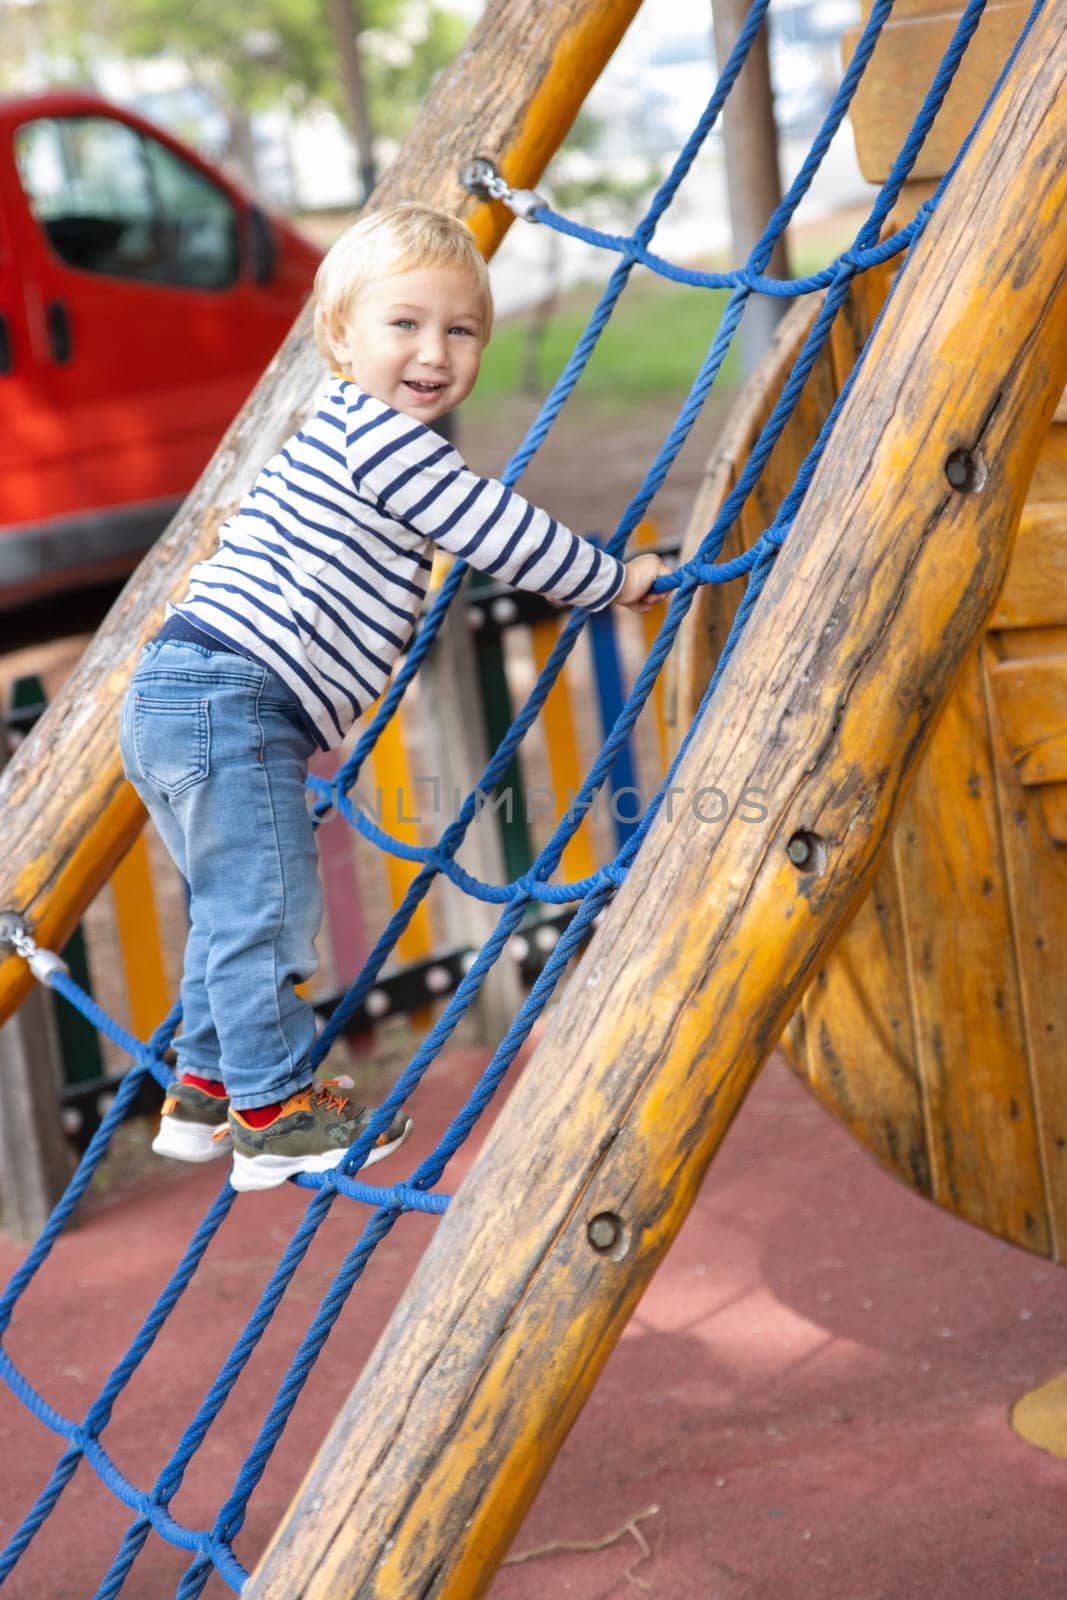 Cute little blonde boy playing on the playground - looking in the camera. Vertical shot